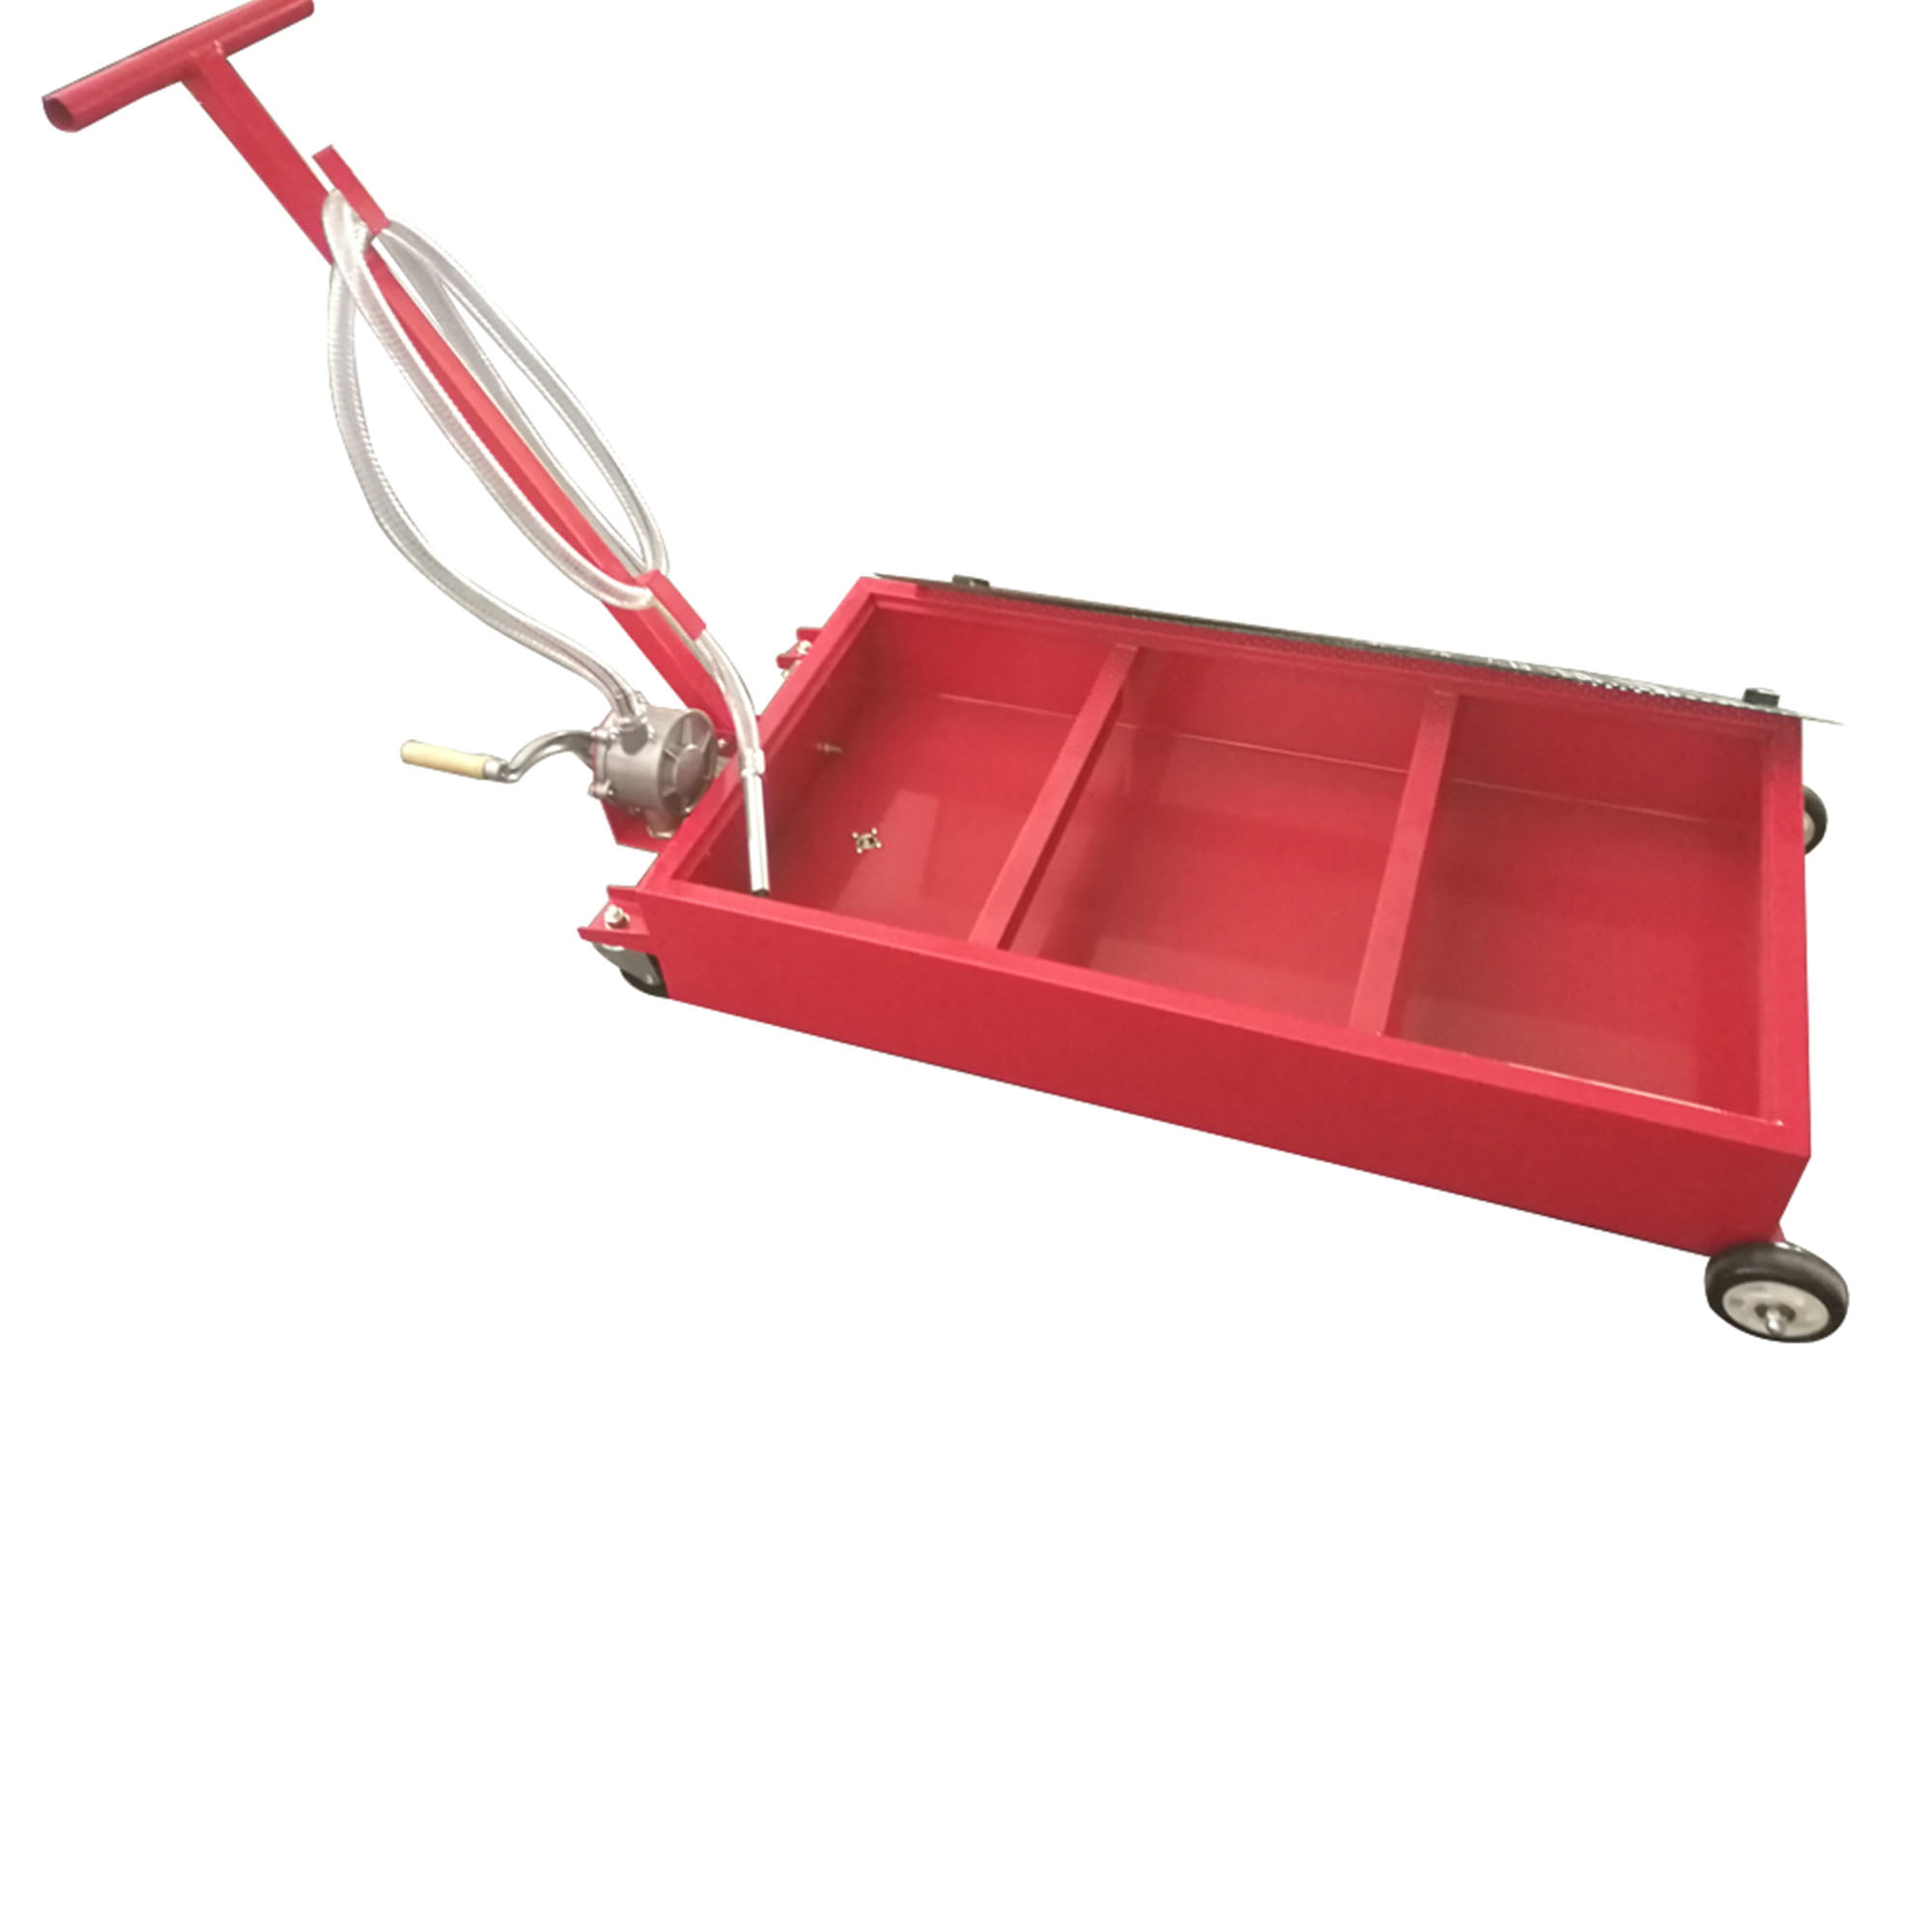 Casters: 4-inch L x W x H 10 cm 131 x 64 x 80 / cm Manoch 20 Gallon Oil Drain Pan Low Profile Dolly with Pump 8 feet Hose and Wheel Material: Iron Overall Dimensions: 51.57 x 25.2 x 31.5 